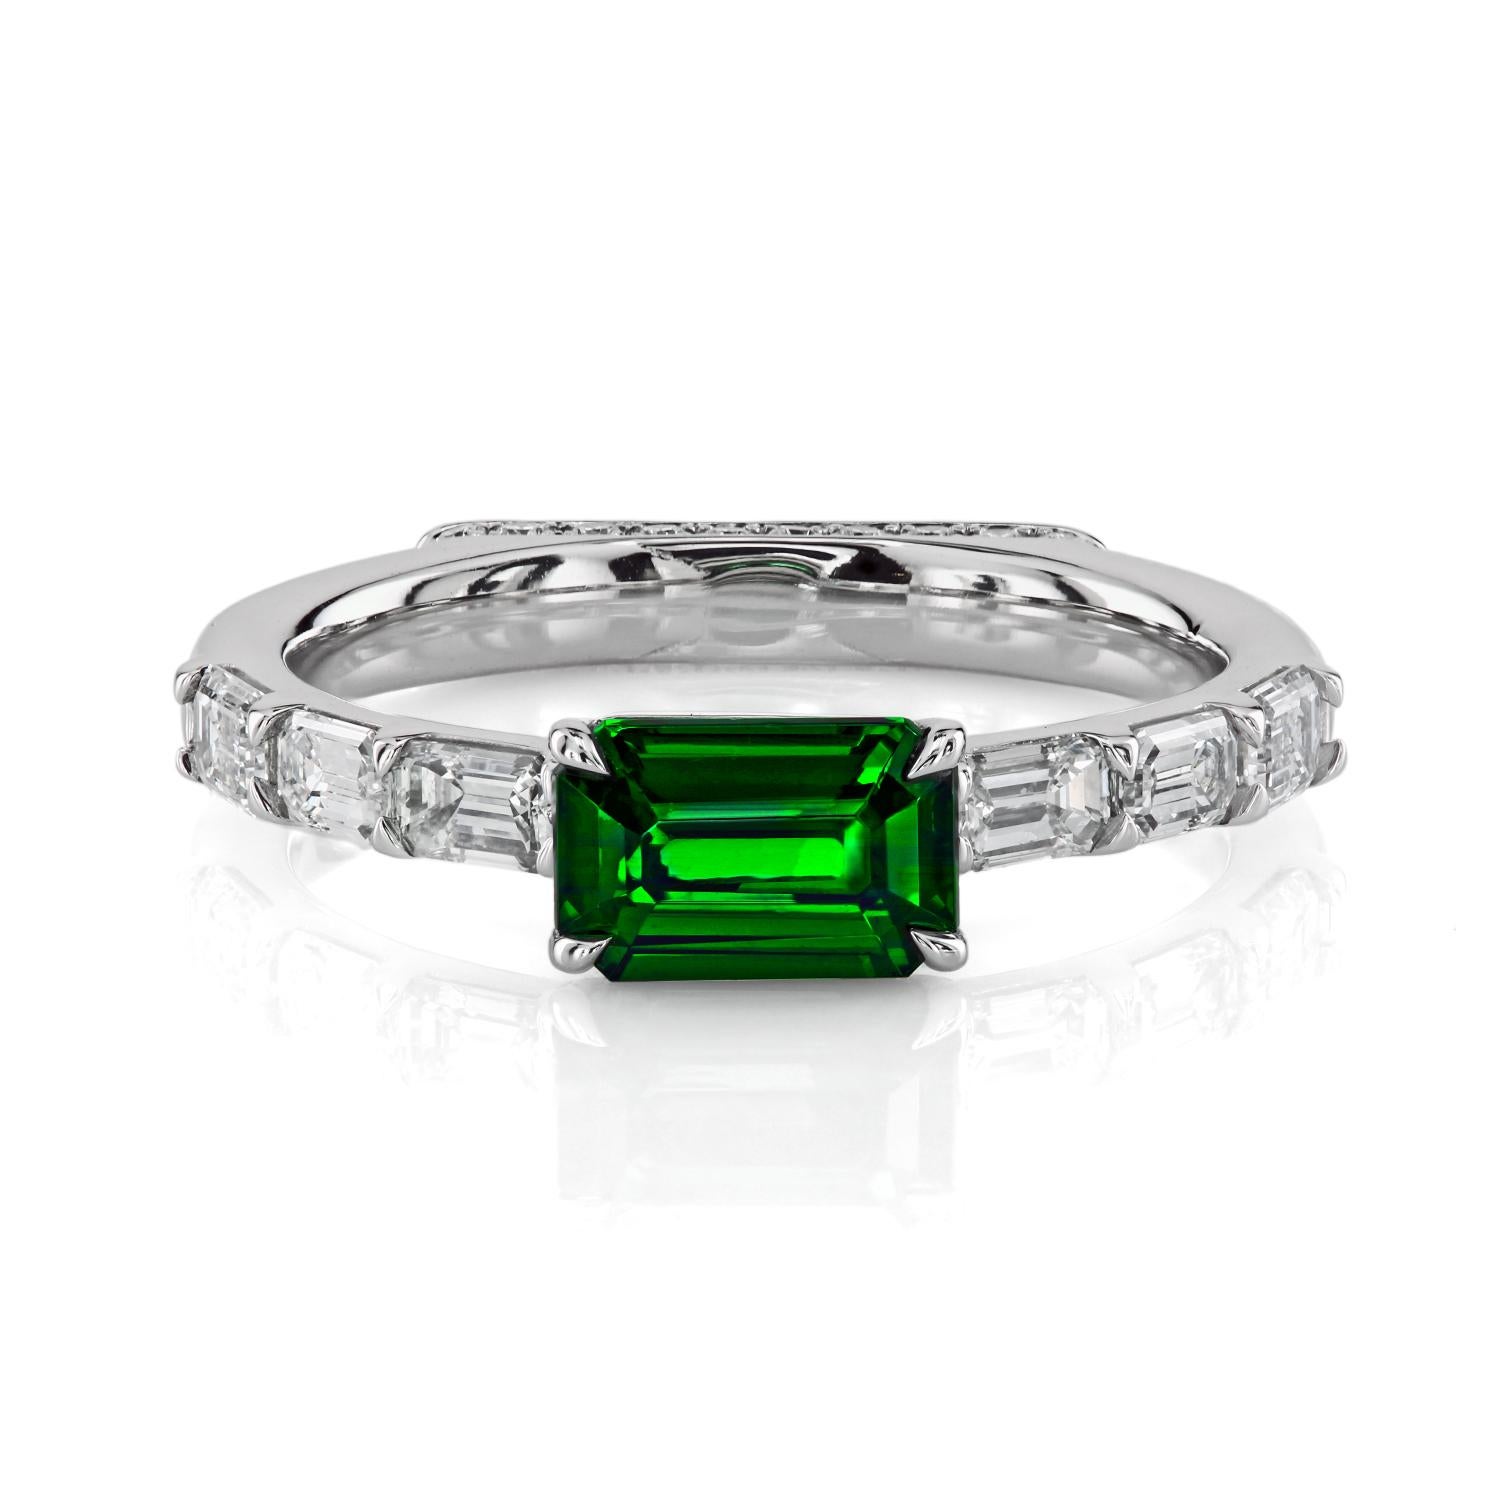 Beauty comes in diverse shapes and sizes. So do Leon Mege's colorful right-hand platinum rings set with a rainbow of colorful natural gemstones. This beautiful combination of a natural tsavorite and emerald-cut diamonds in a reversible East-West